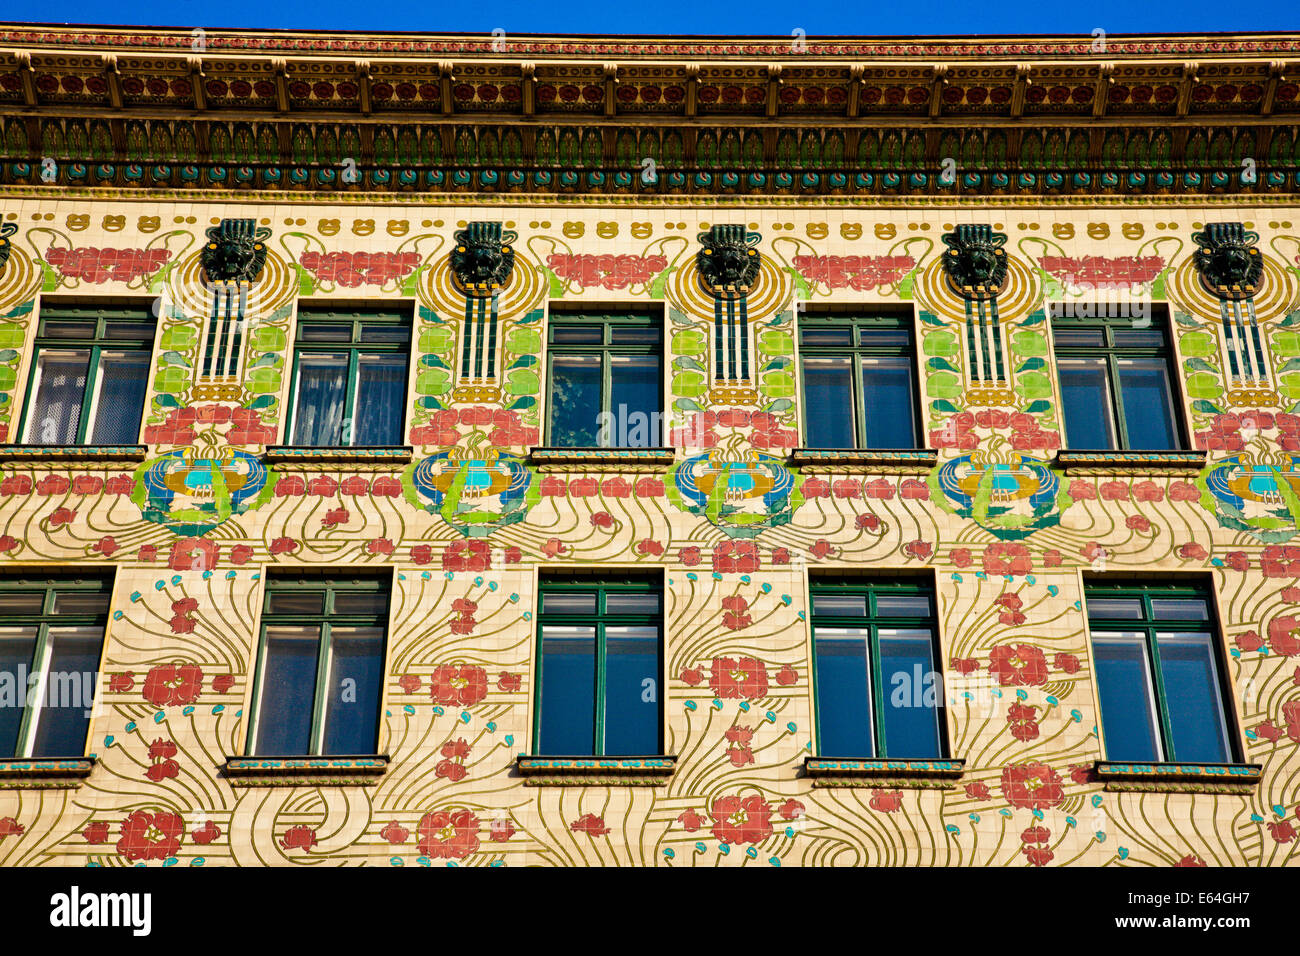 Architect Otto Wagner's apartment building Linke Wienzeile, no. 40 (1898-1899). No. 40 is also known as Majolica referencing the Stock Photo